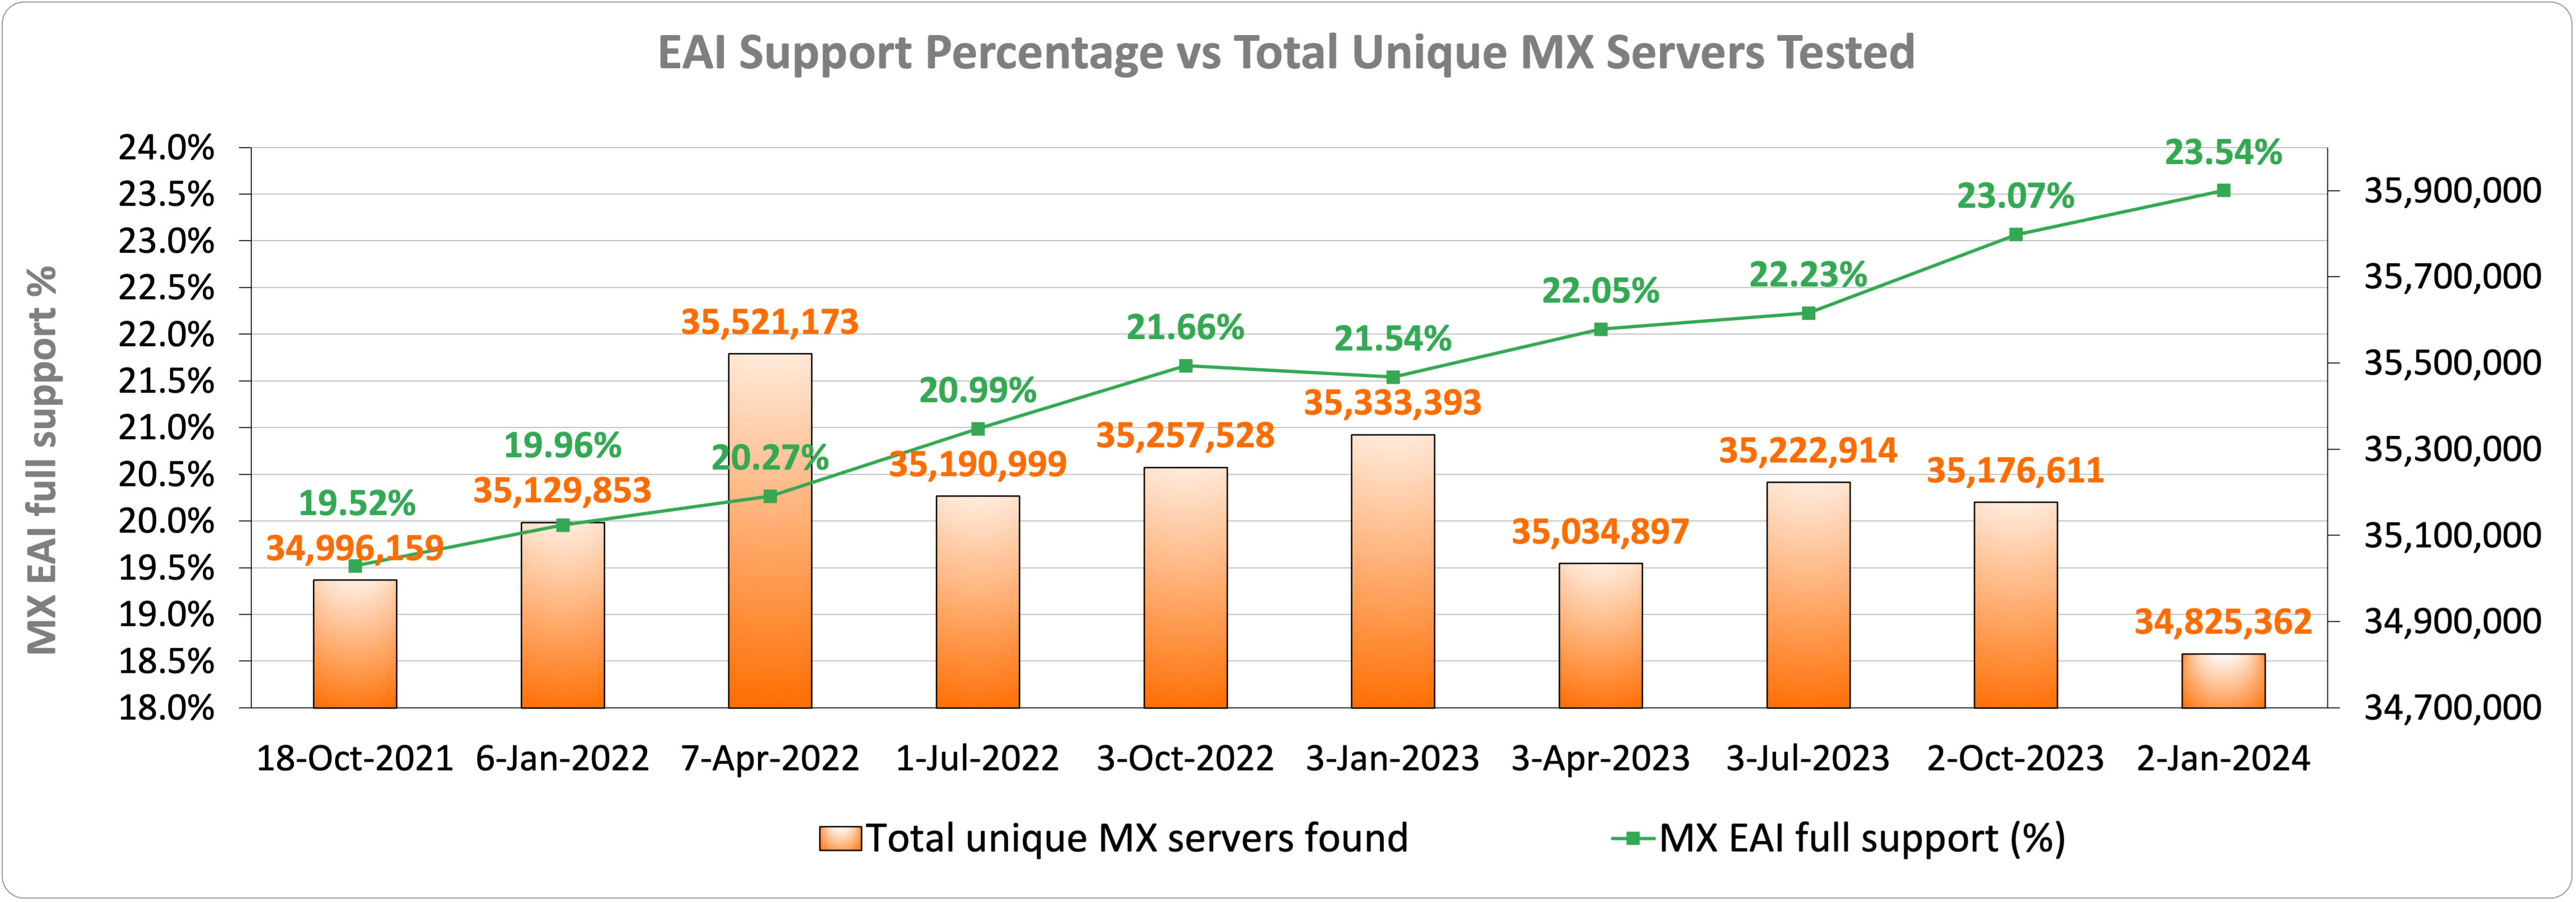 EAI Support Percentage vs Total Unique MX Servers Tested